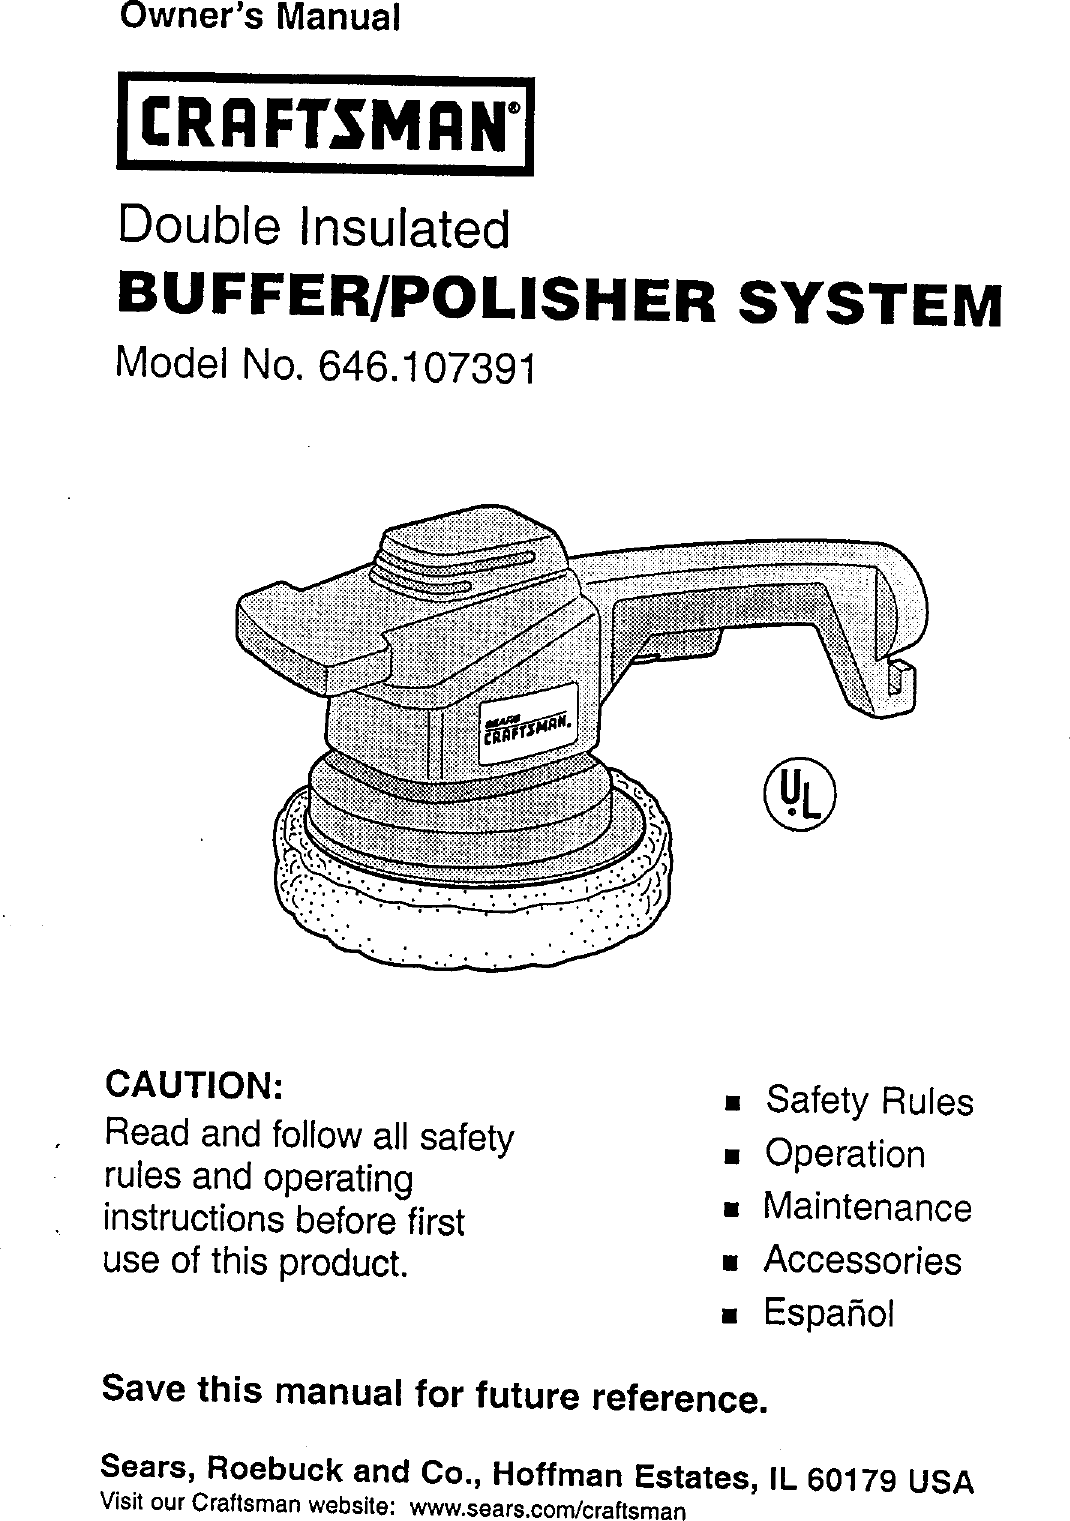 Page 1 of 7 - Craftsman 646107391 User Manual  BUFFER/POLISHER SYSTEM - Manuals And Guides L0020230